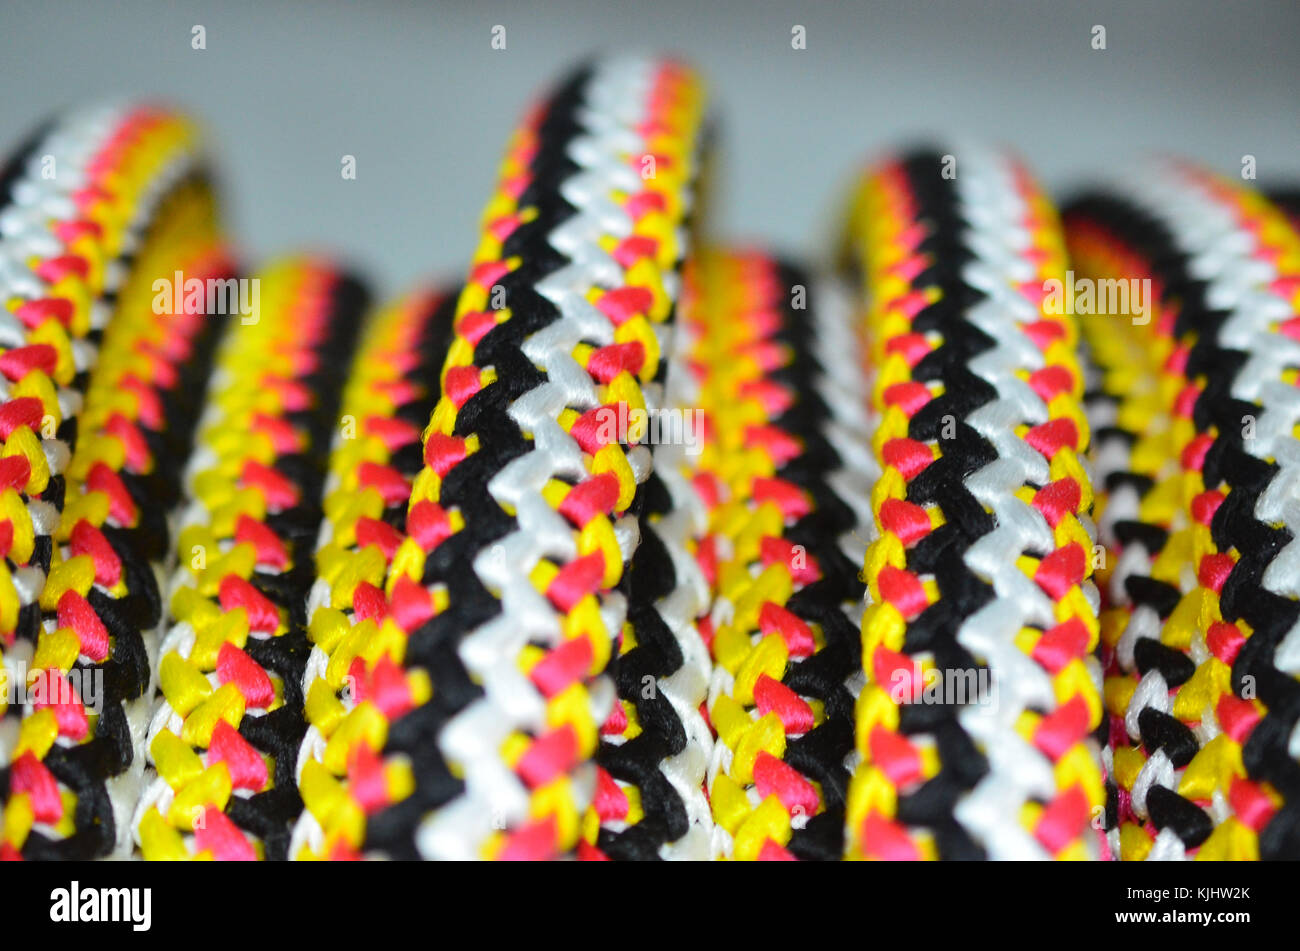 A ball of multi-colored rope for lifting heavy loads close-up Stock Photo